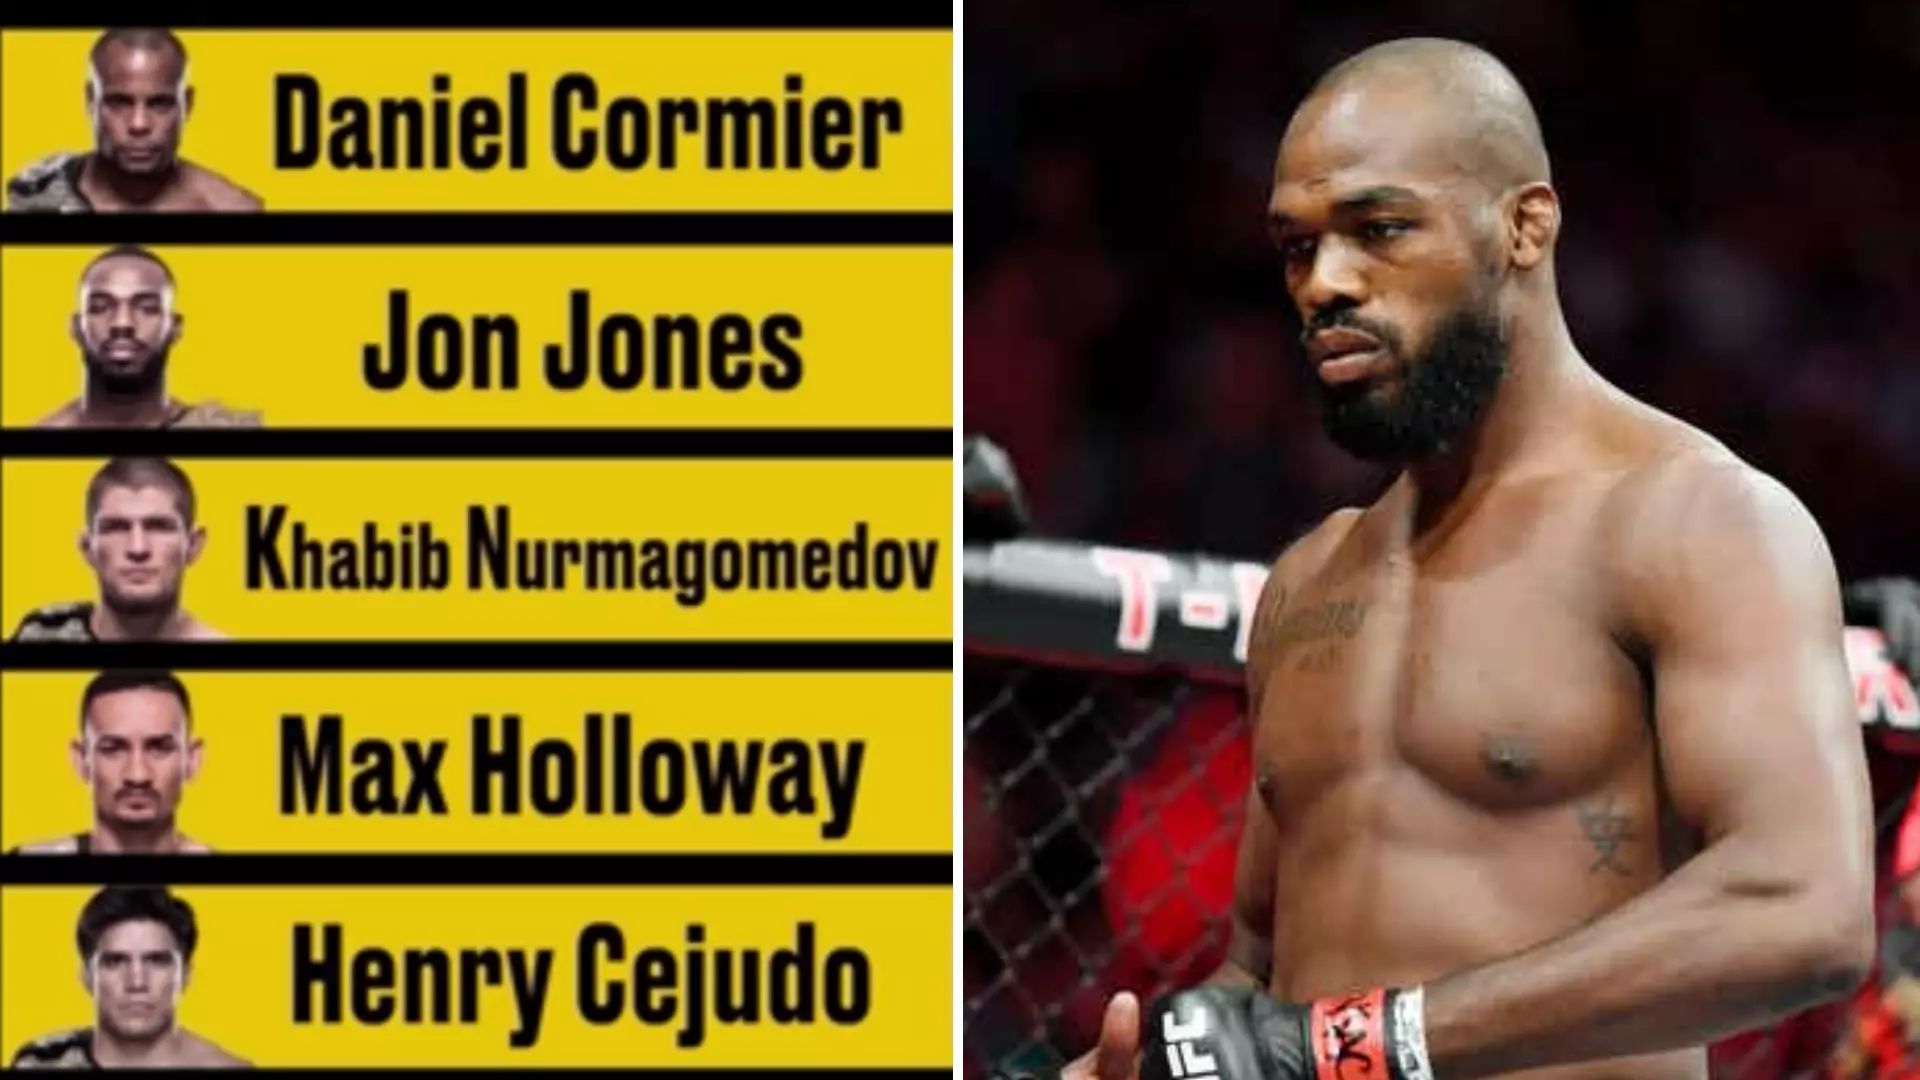 Fan’s Video Shows How UFC’s Pound-For-Pound Rankings Drastically Changed From 2013 To 2019